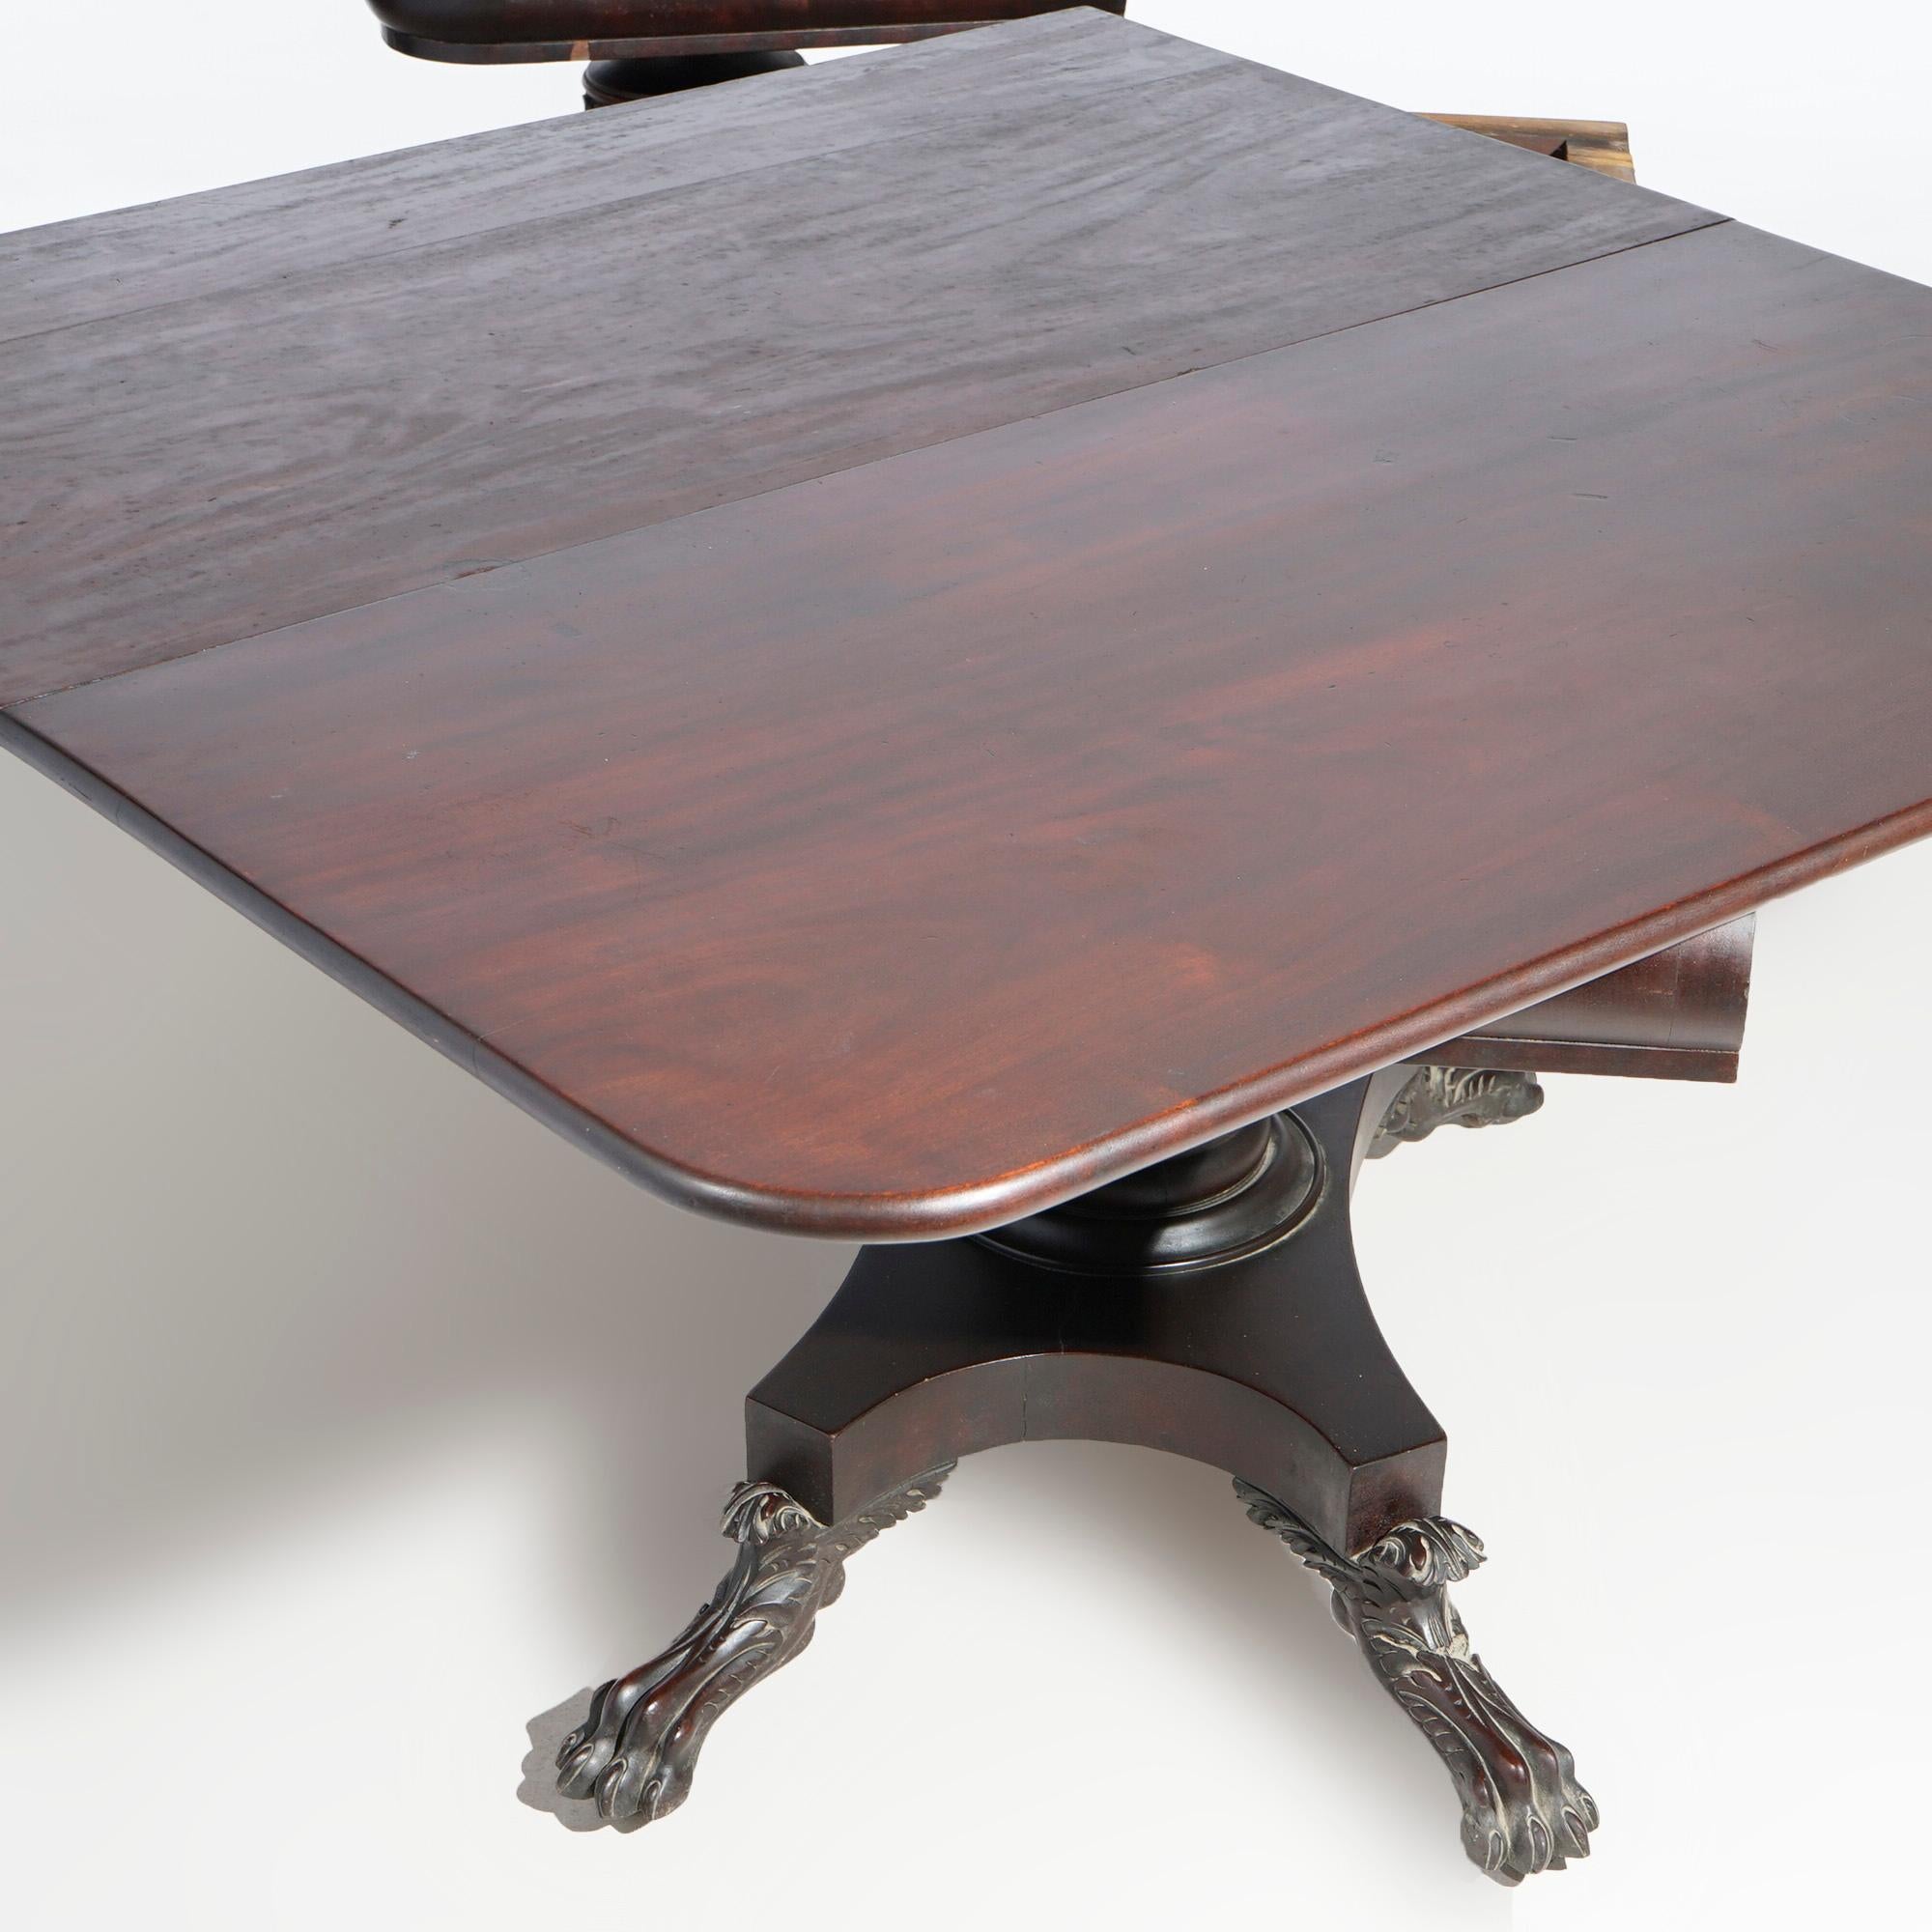 Antique American Empire Greco Flame Mahogany Double Pedestal Banquet Table c1840 For Sale 2